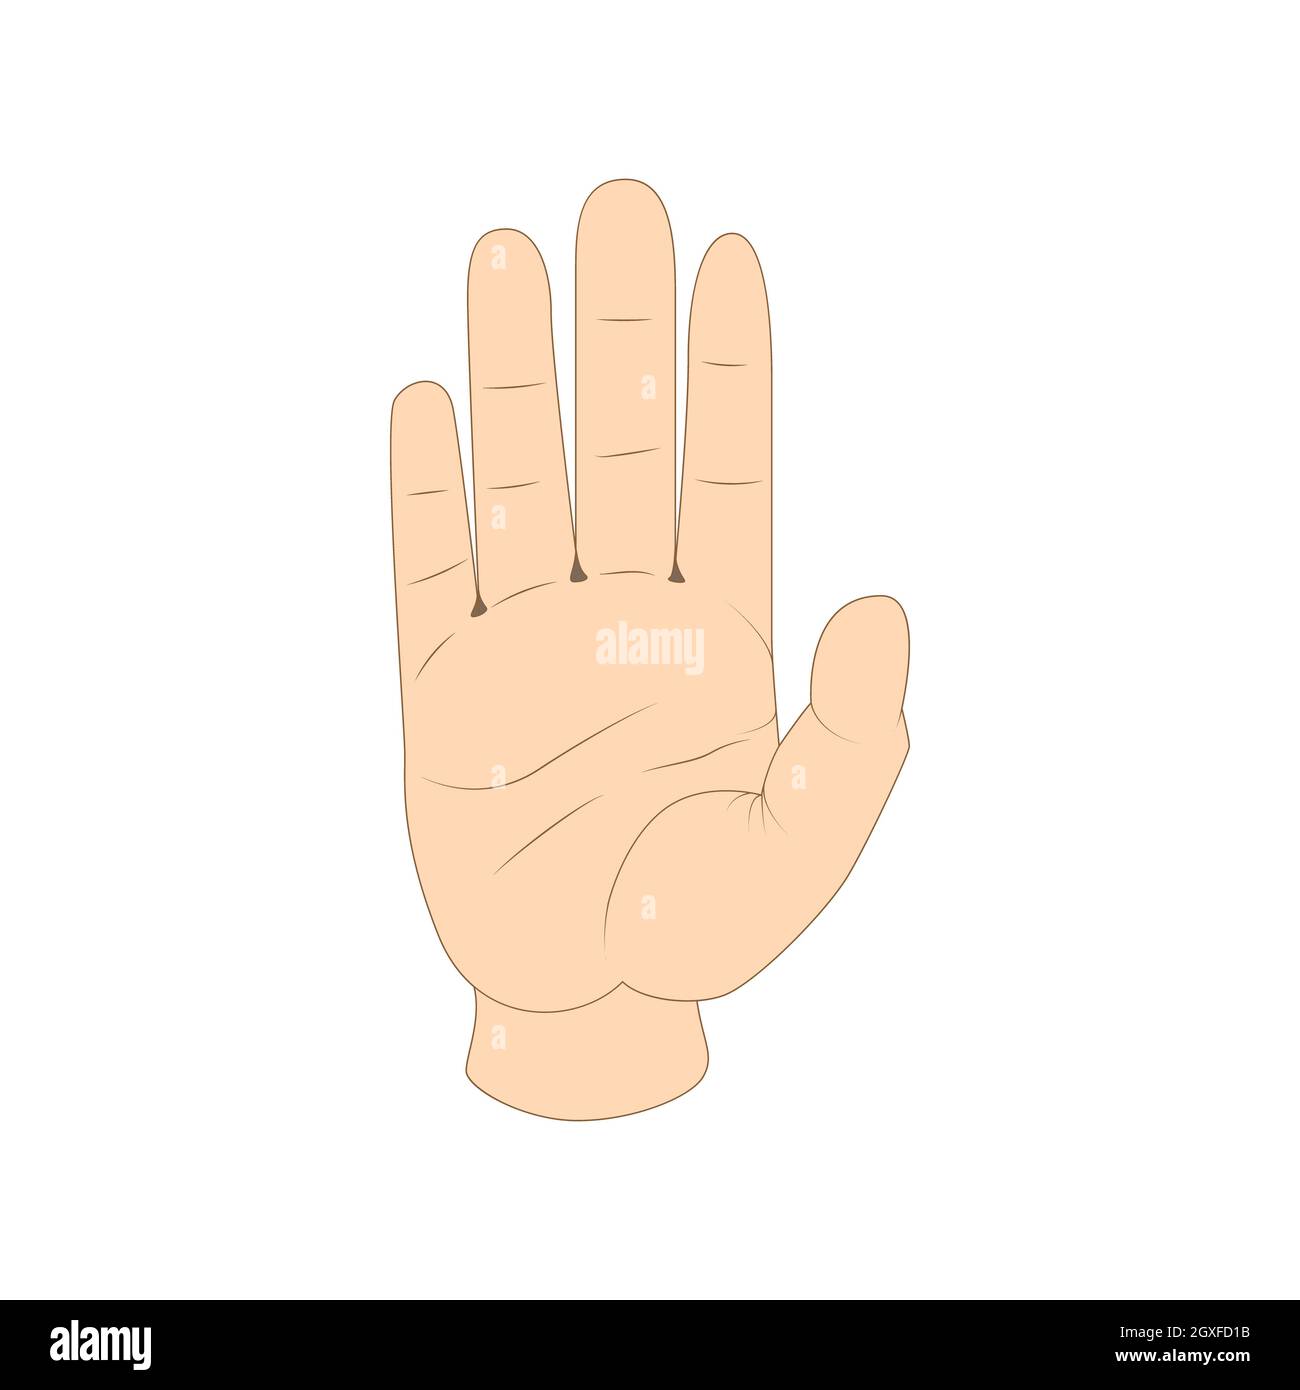 Hand showing five fingers. Welcome or stopping gesture. icon in cartoon style isolated on white background Stock Photo